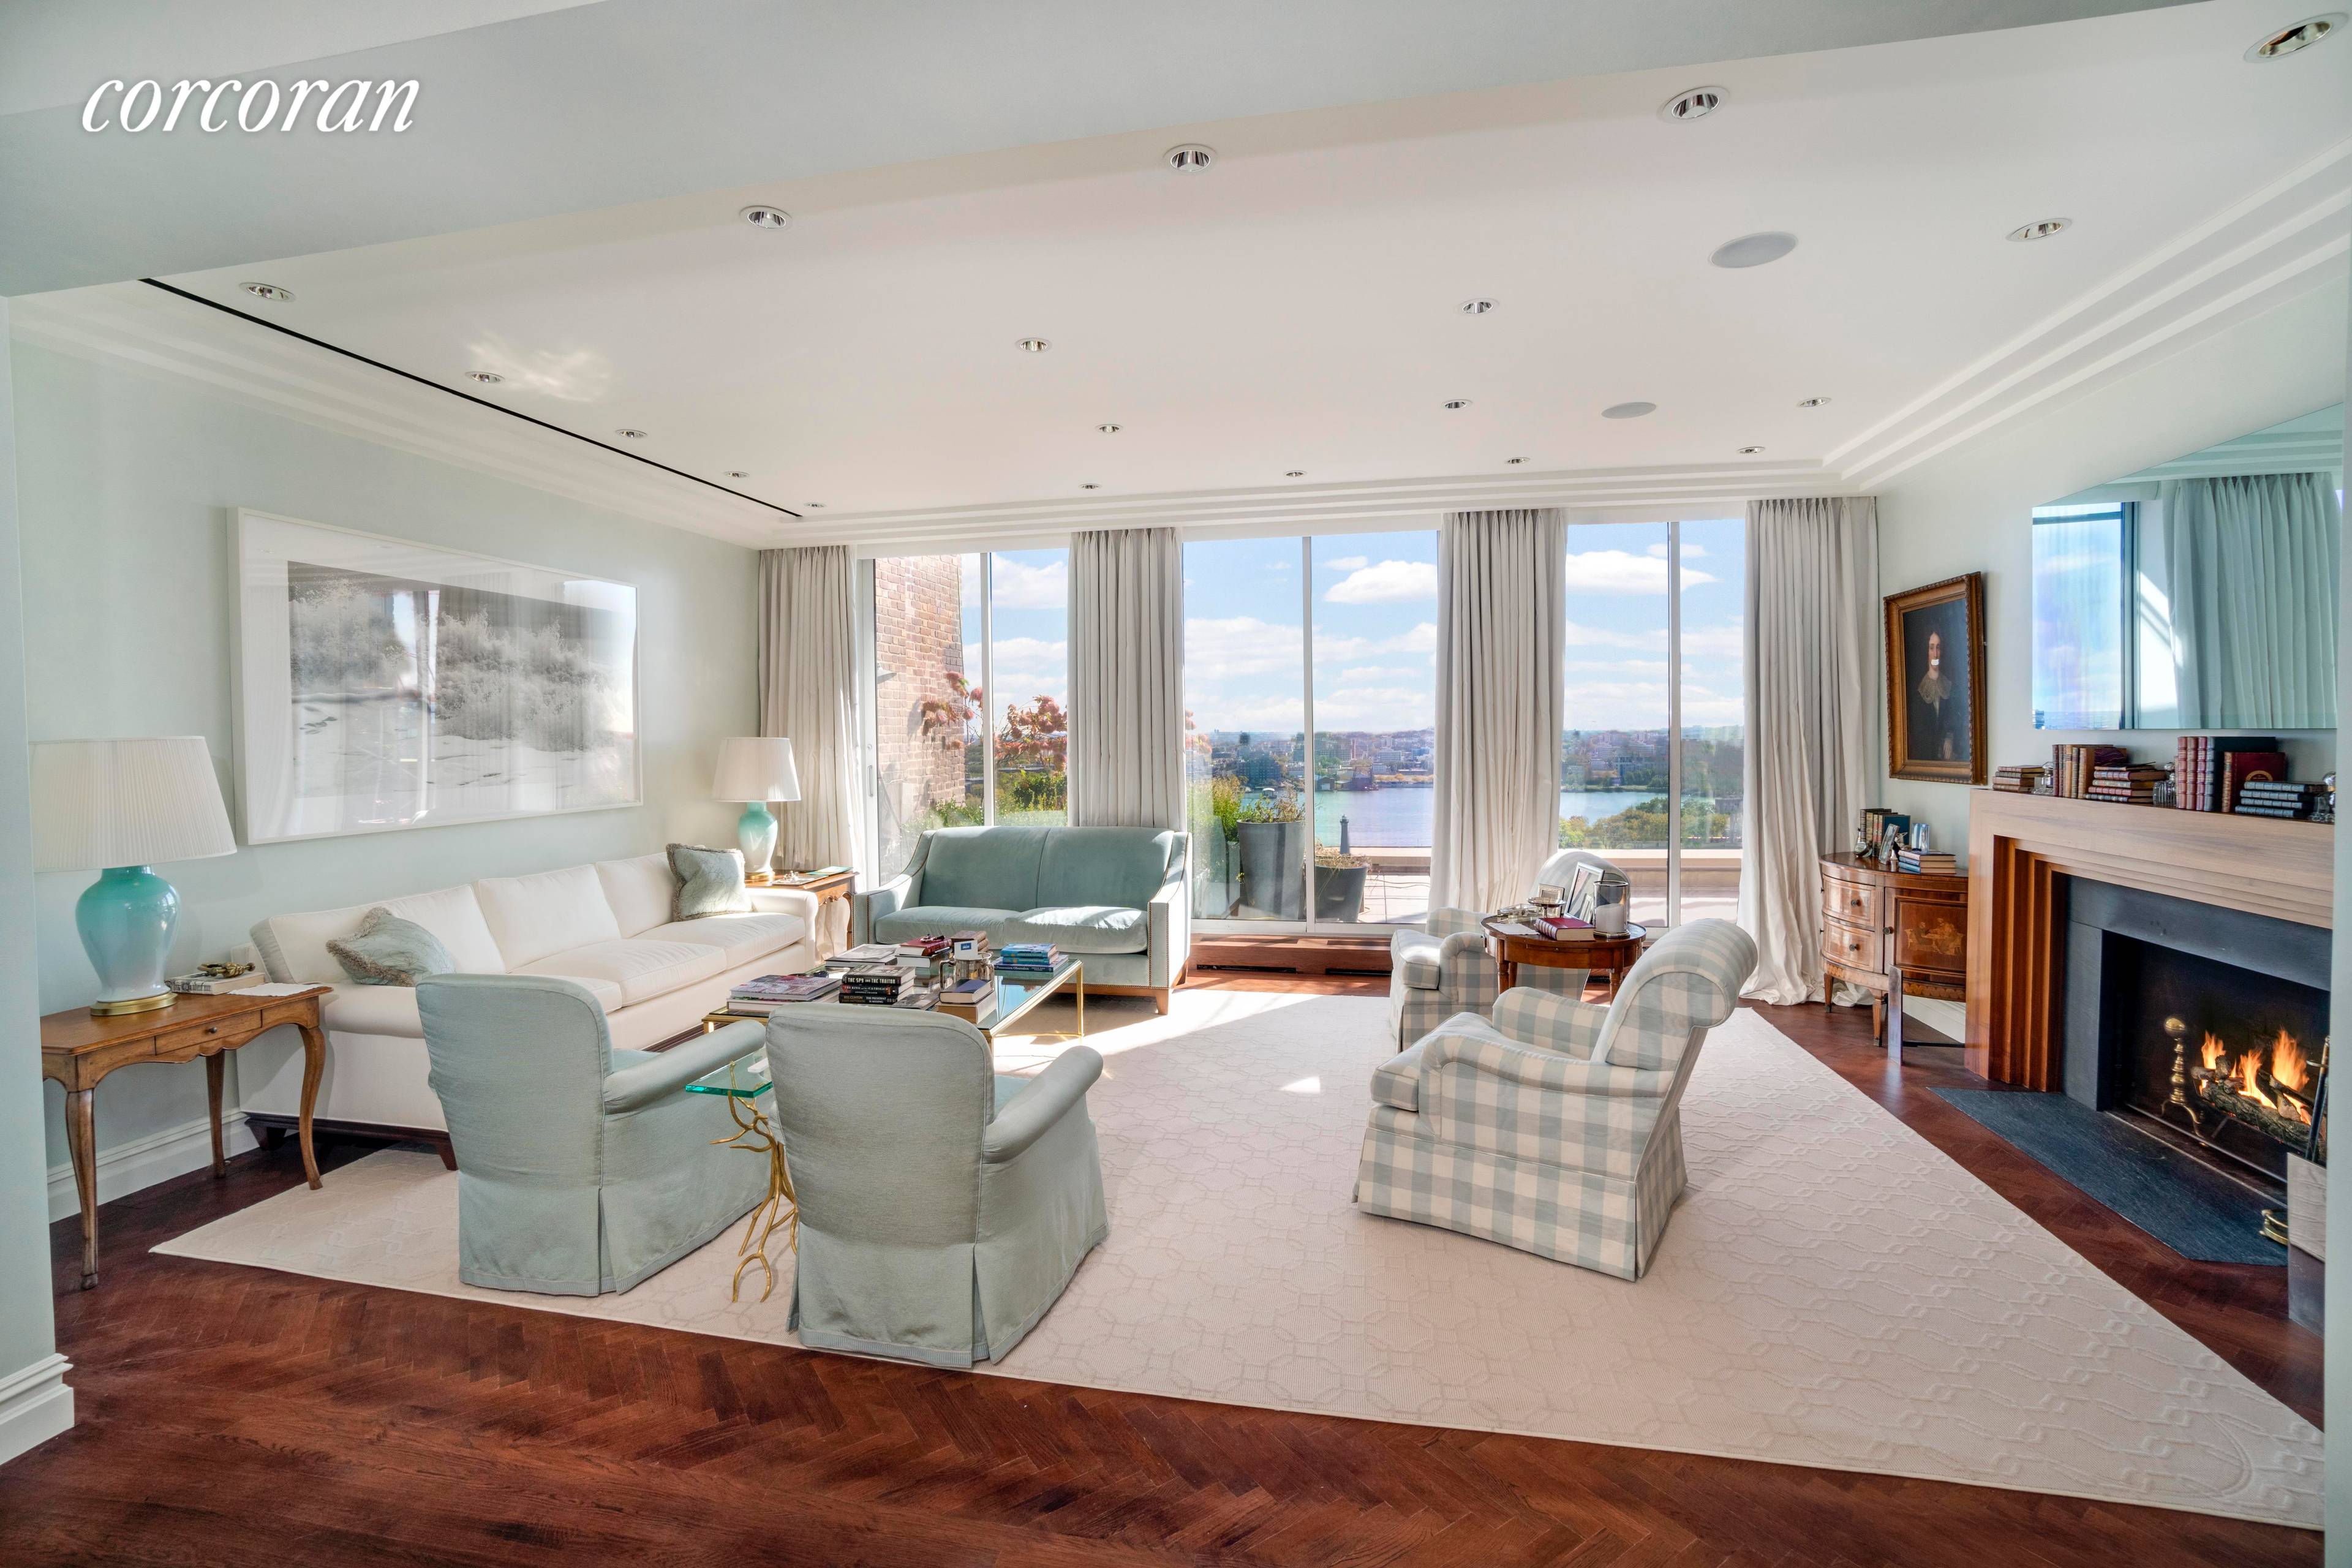 This is perhaps the most romantic river penthouse on the Upper East Side, once owned and occupied by Irving Berlin.